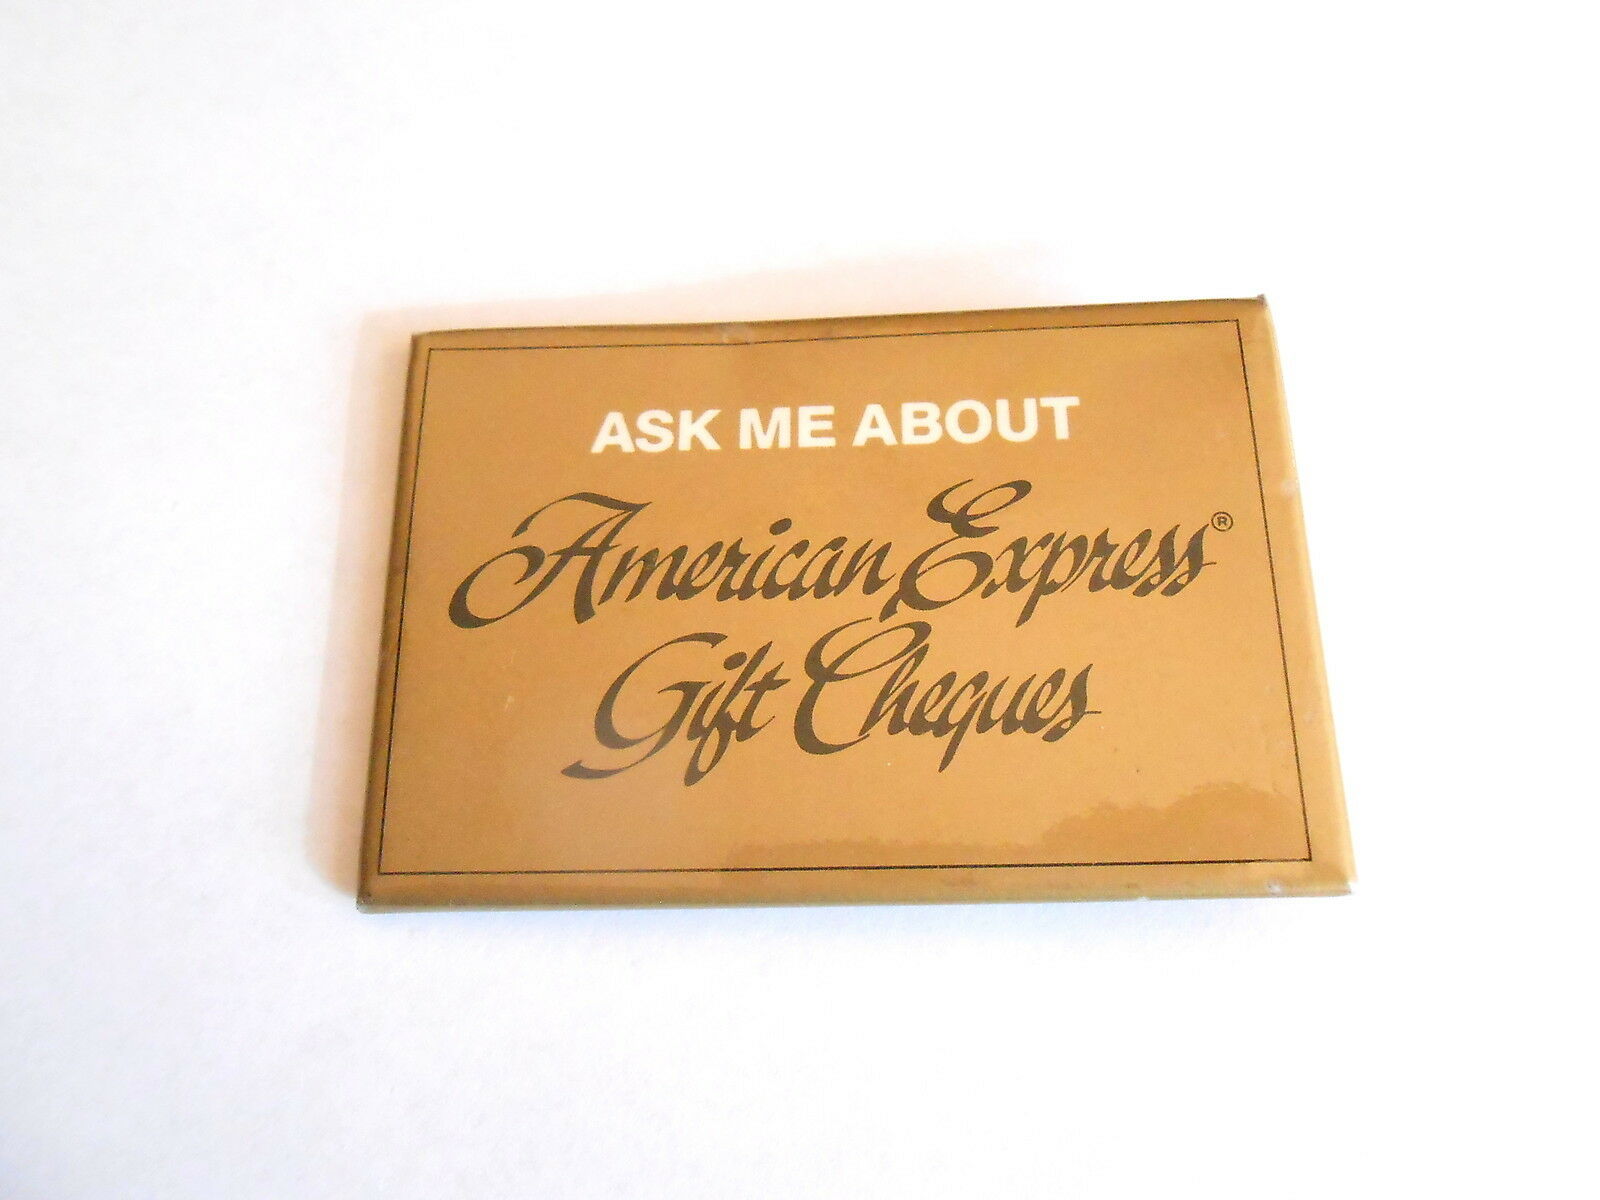 Vintage American Express Gift Cheques Advertising Pinback